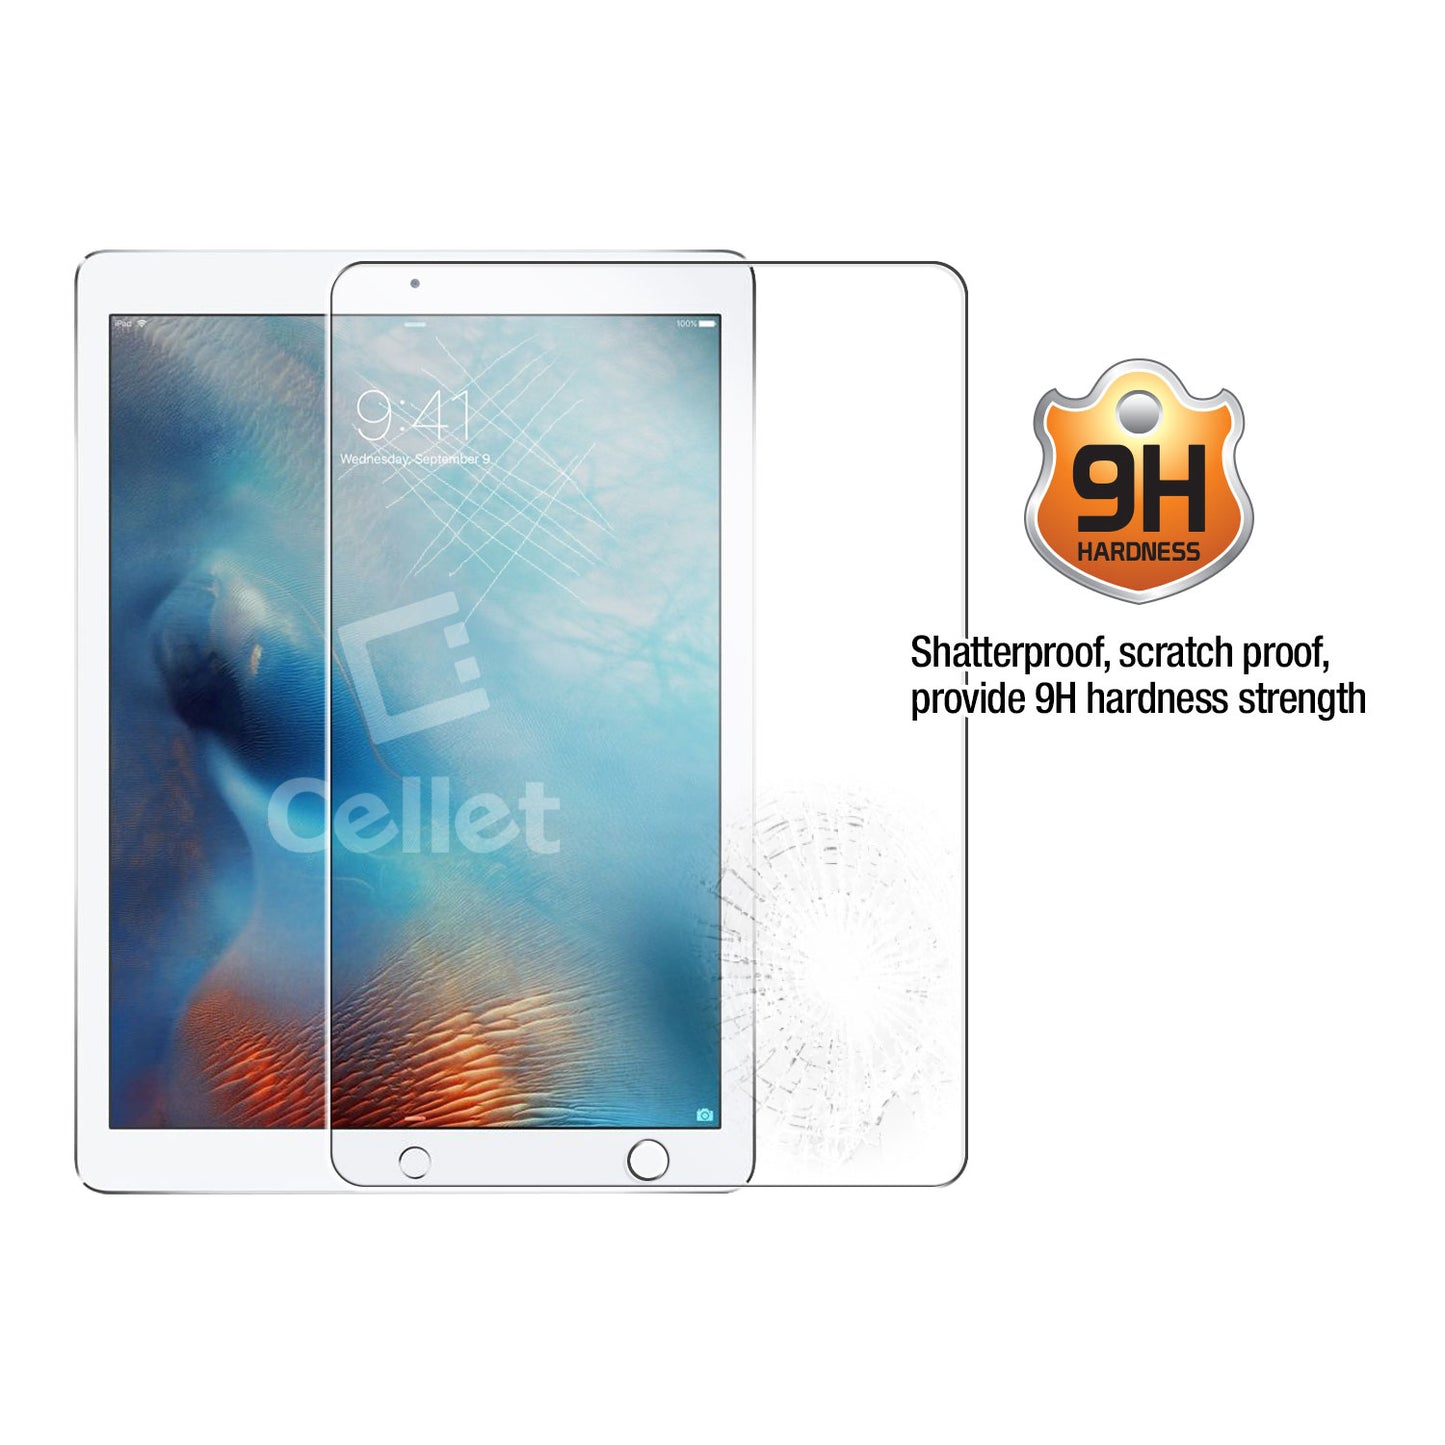 SGIPHPRO11 - iPad Pro 11-inch, Cellet 0.3mm Premium Tempered Glass Screen Protector for Apple iPad Pro 11-inch  (9H Hardness)